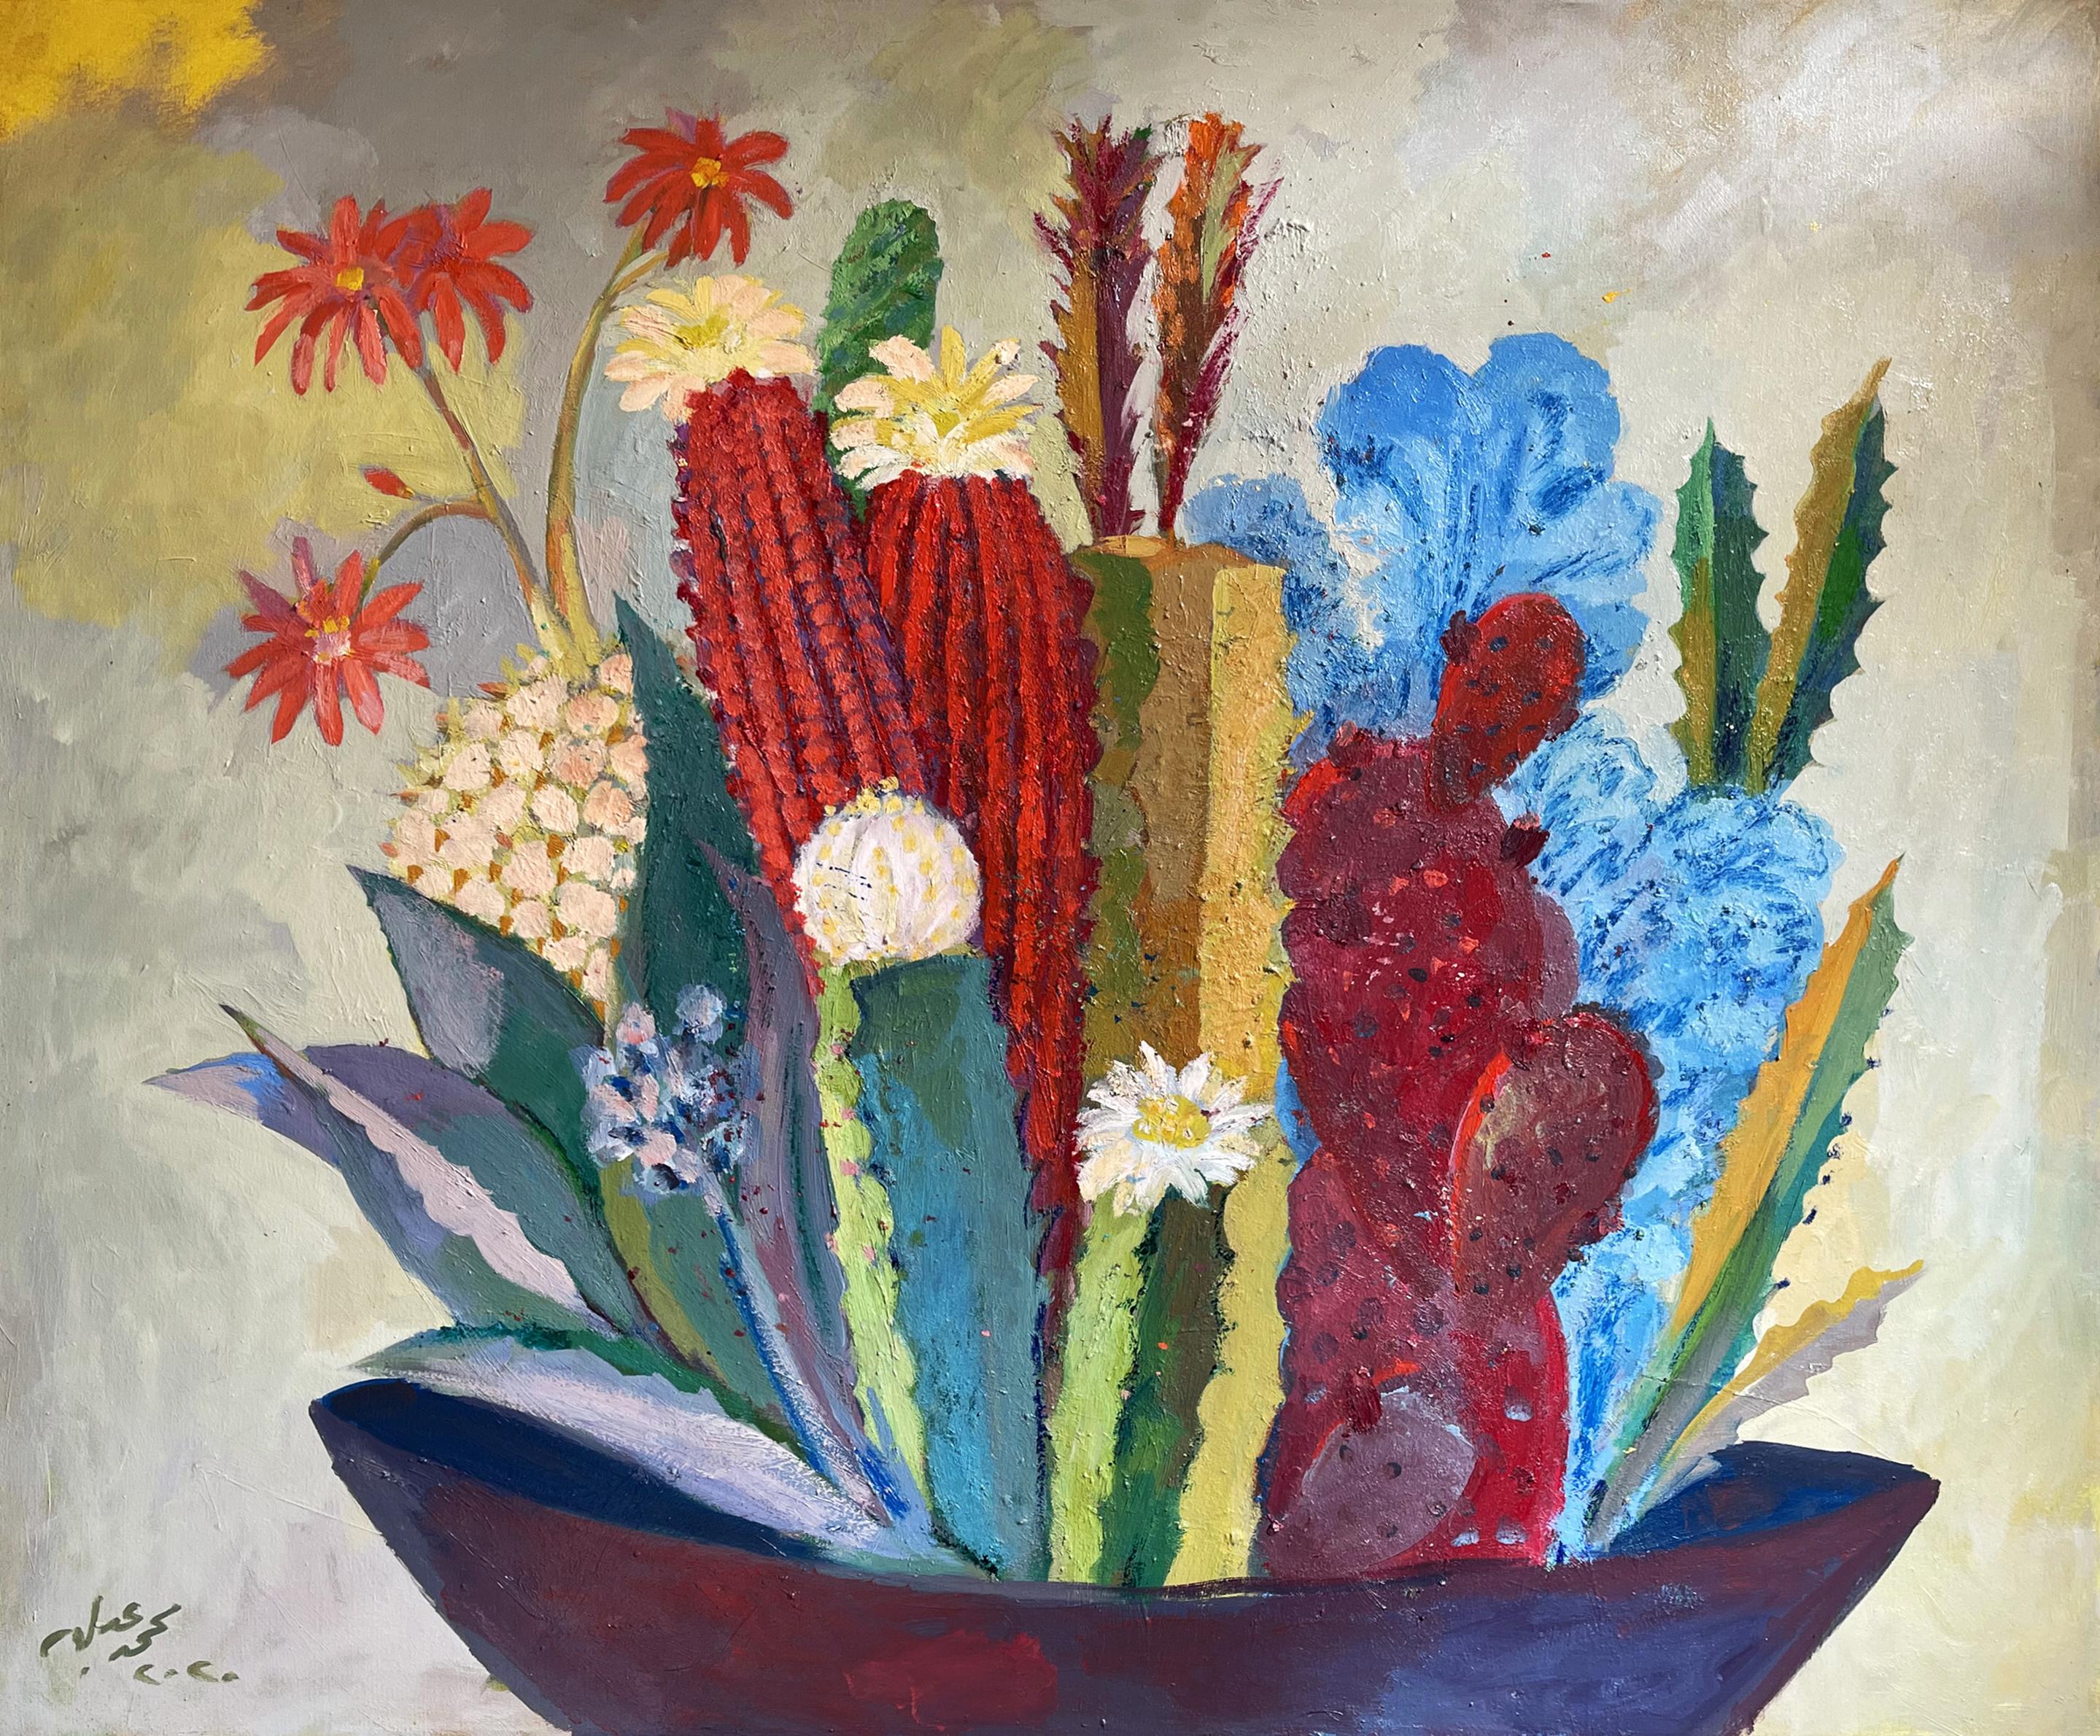 "Cactus 3" Oil Painting 47" x 55" inch by Mohamed Abla